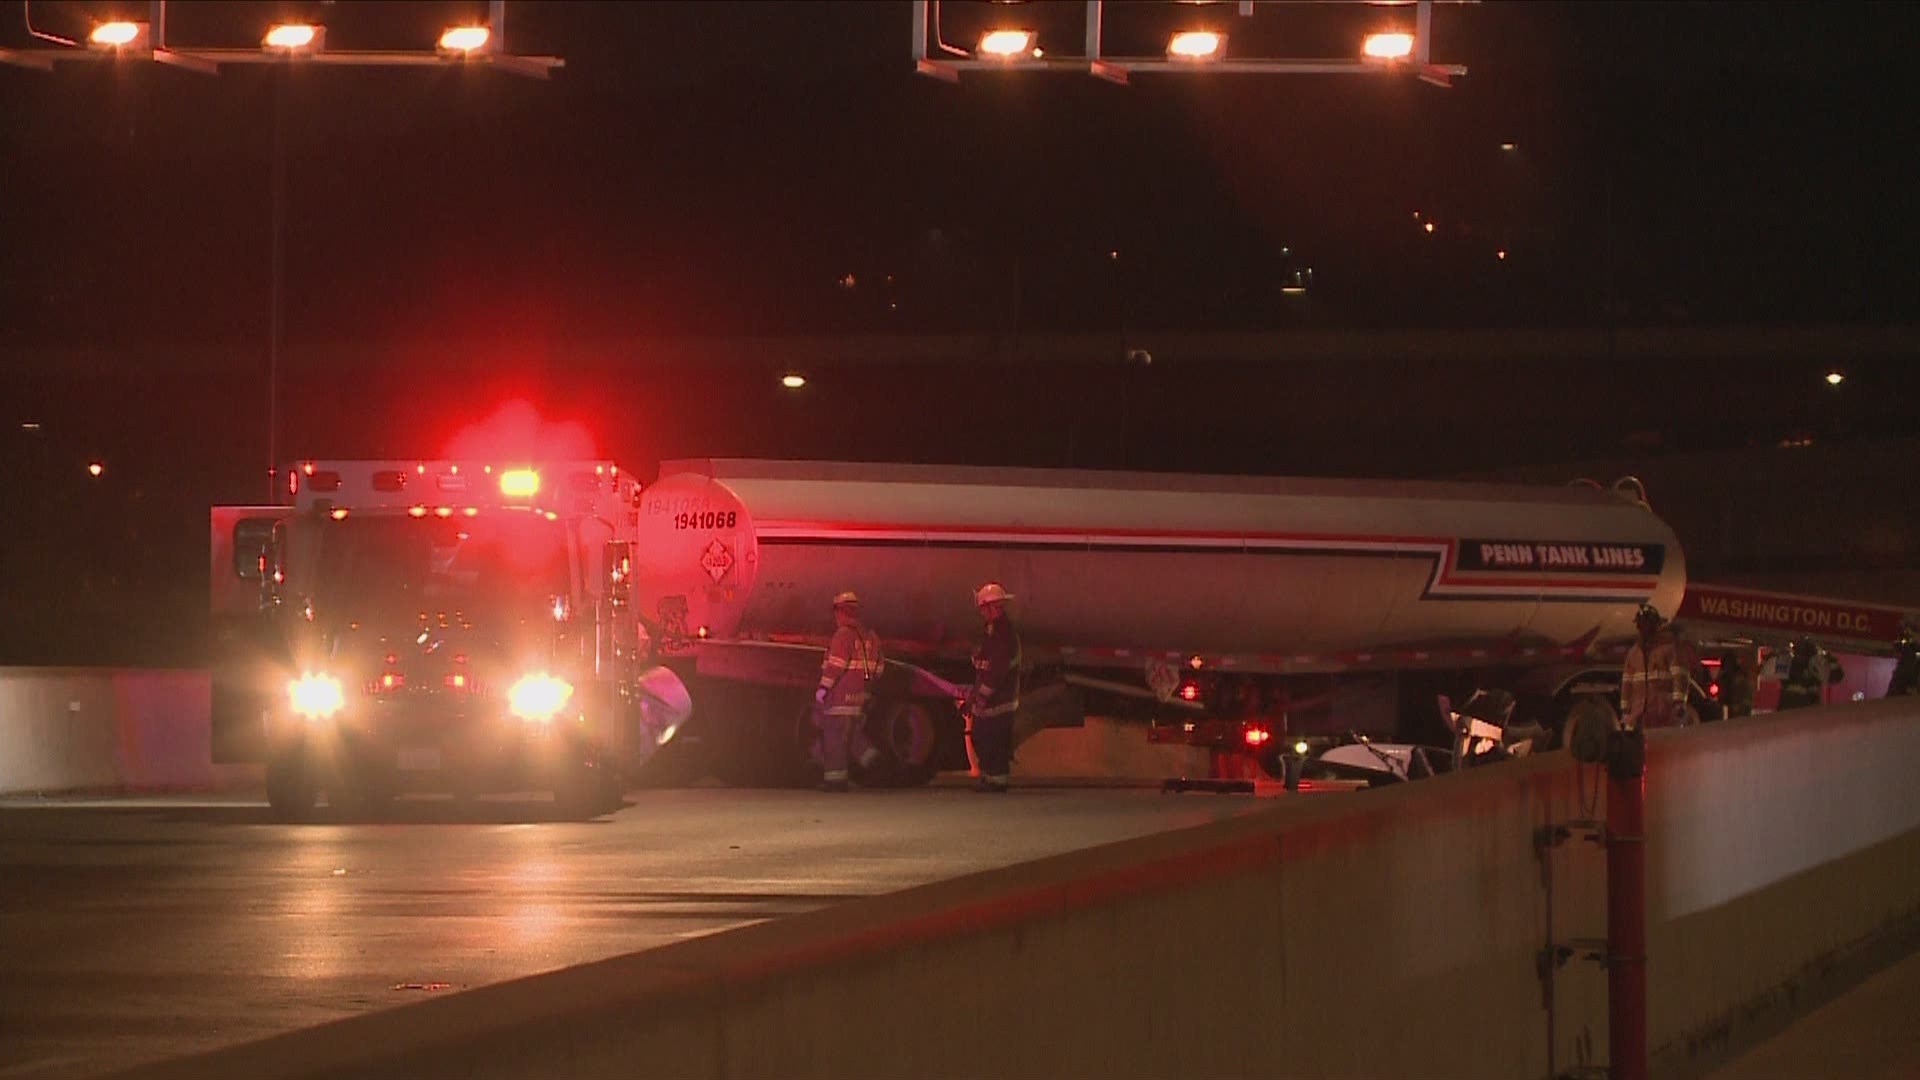 Firefighters reported no injuries from the crash involving a tanker truck